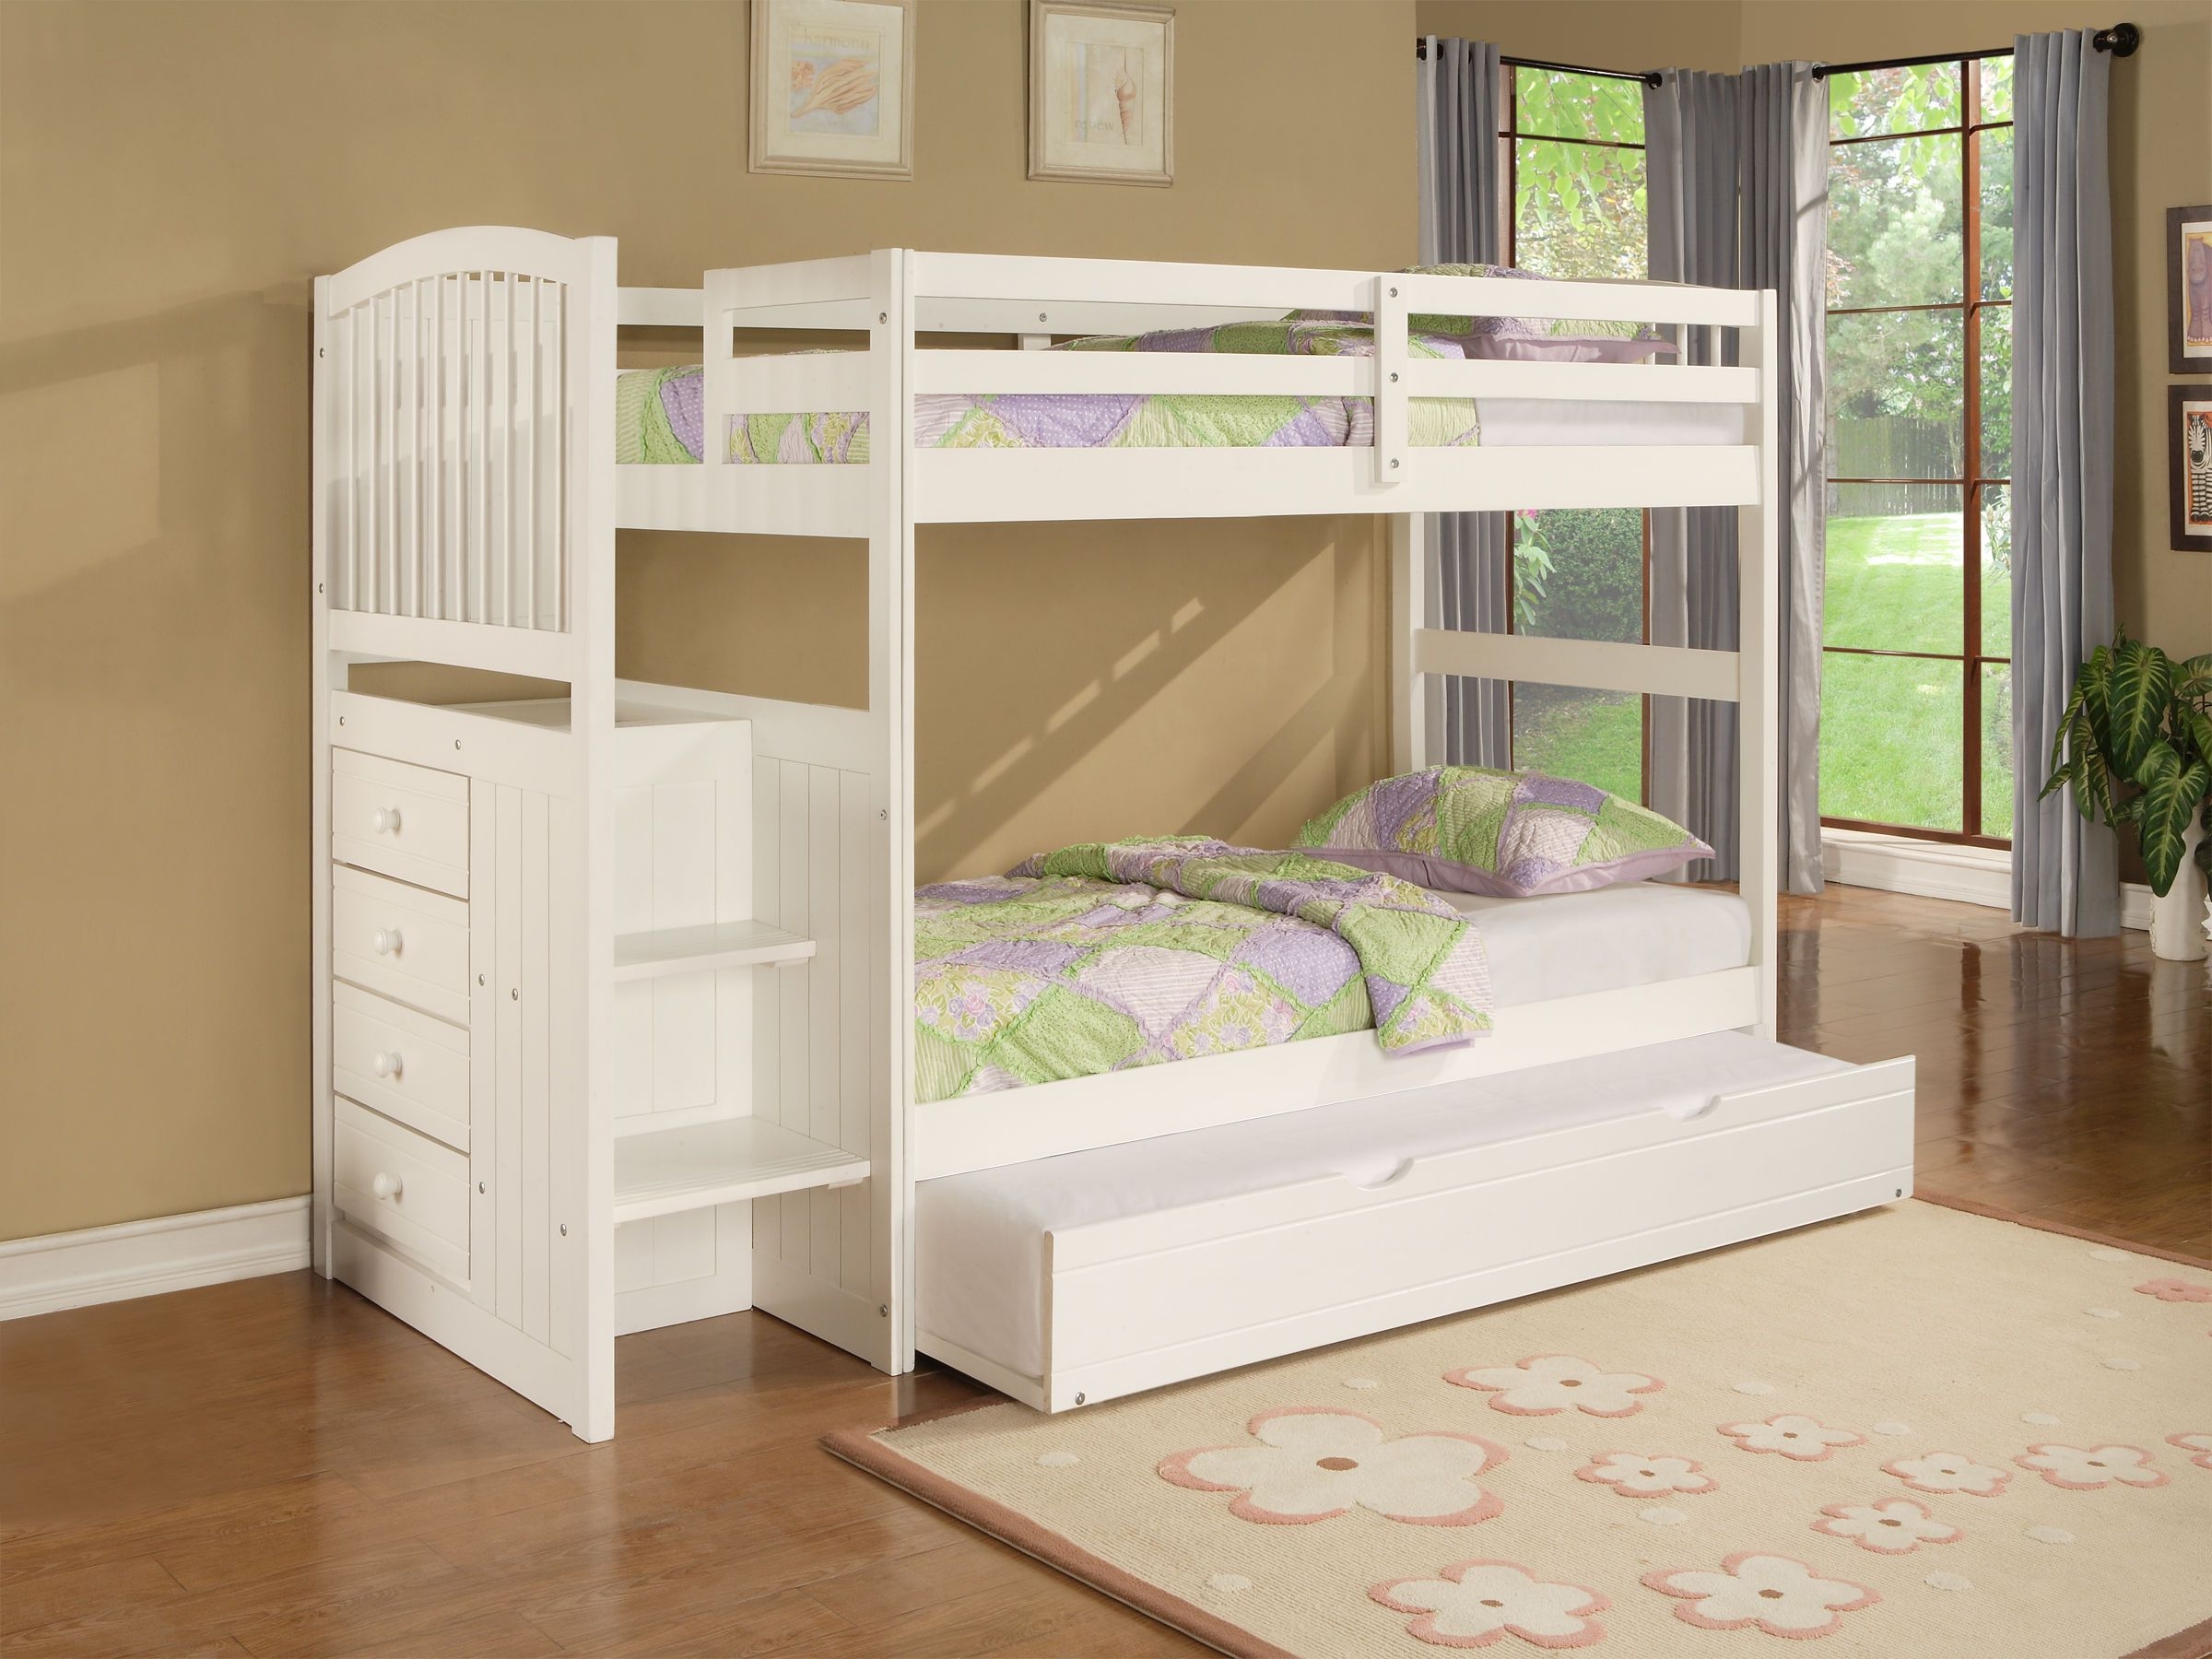 Kids room designs cute white fermoy twin bunk beds with